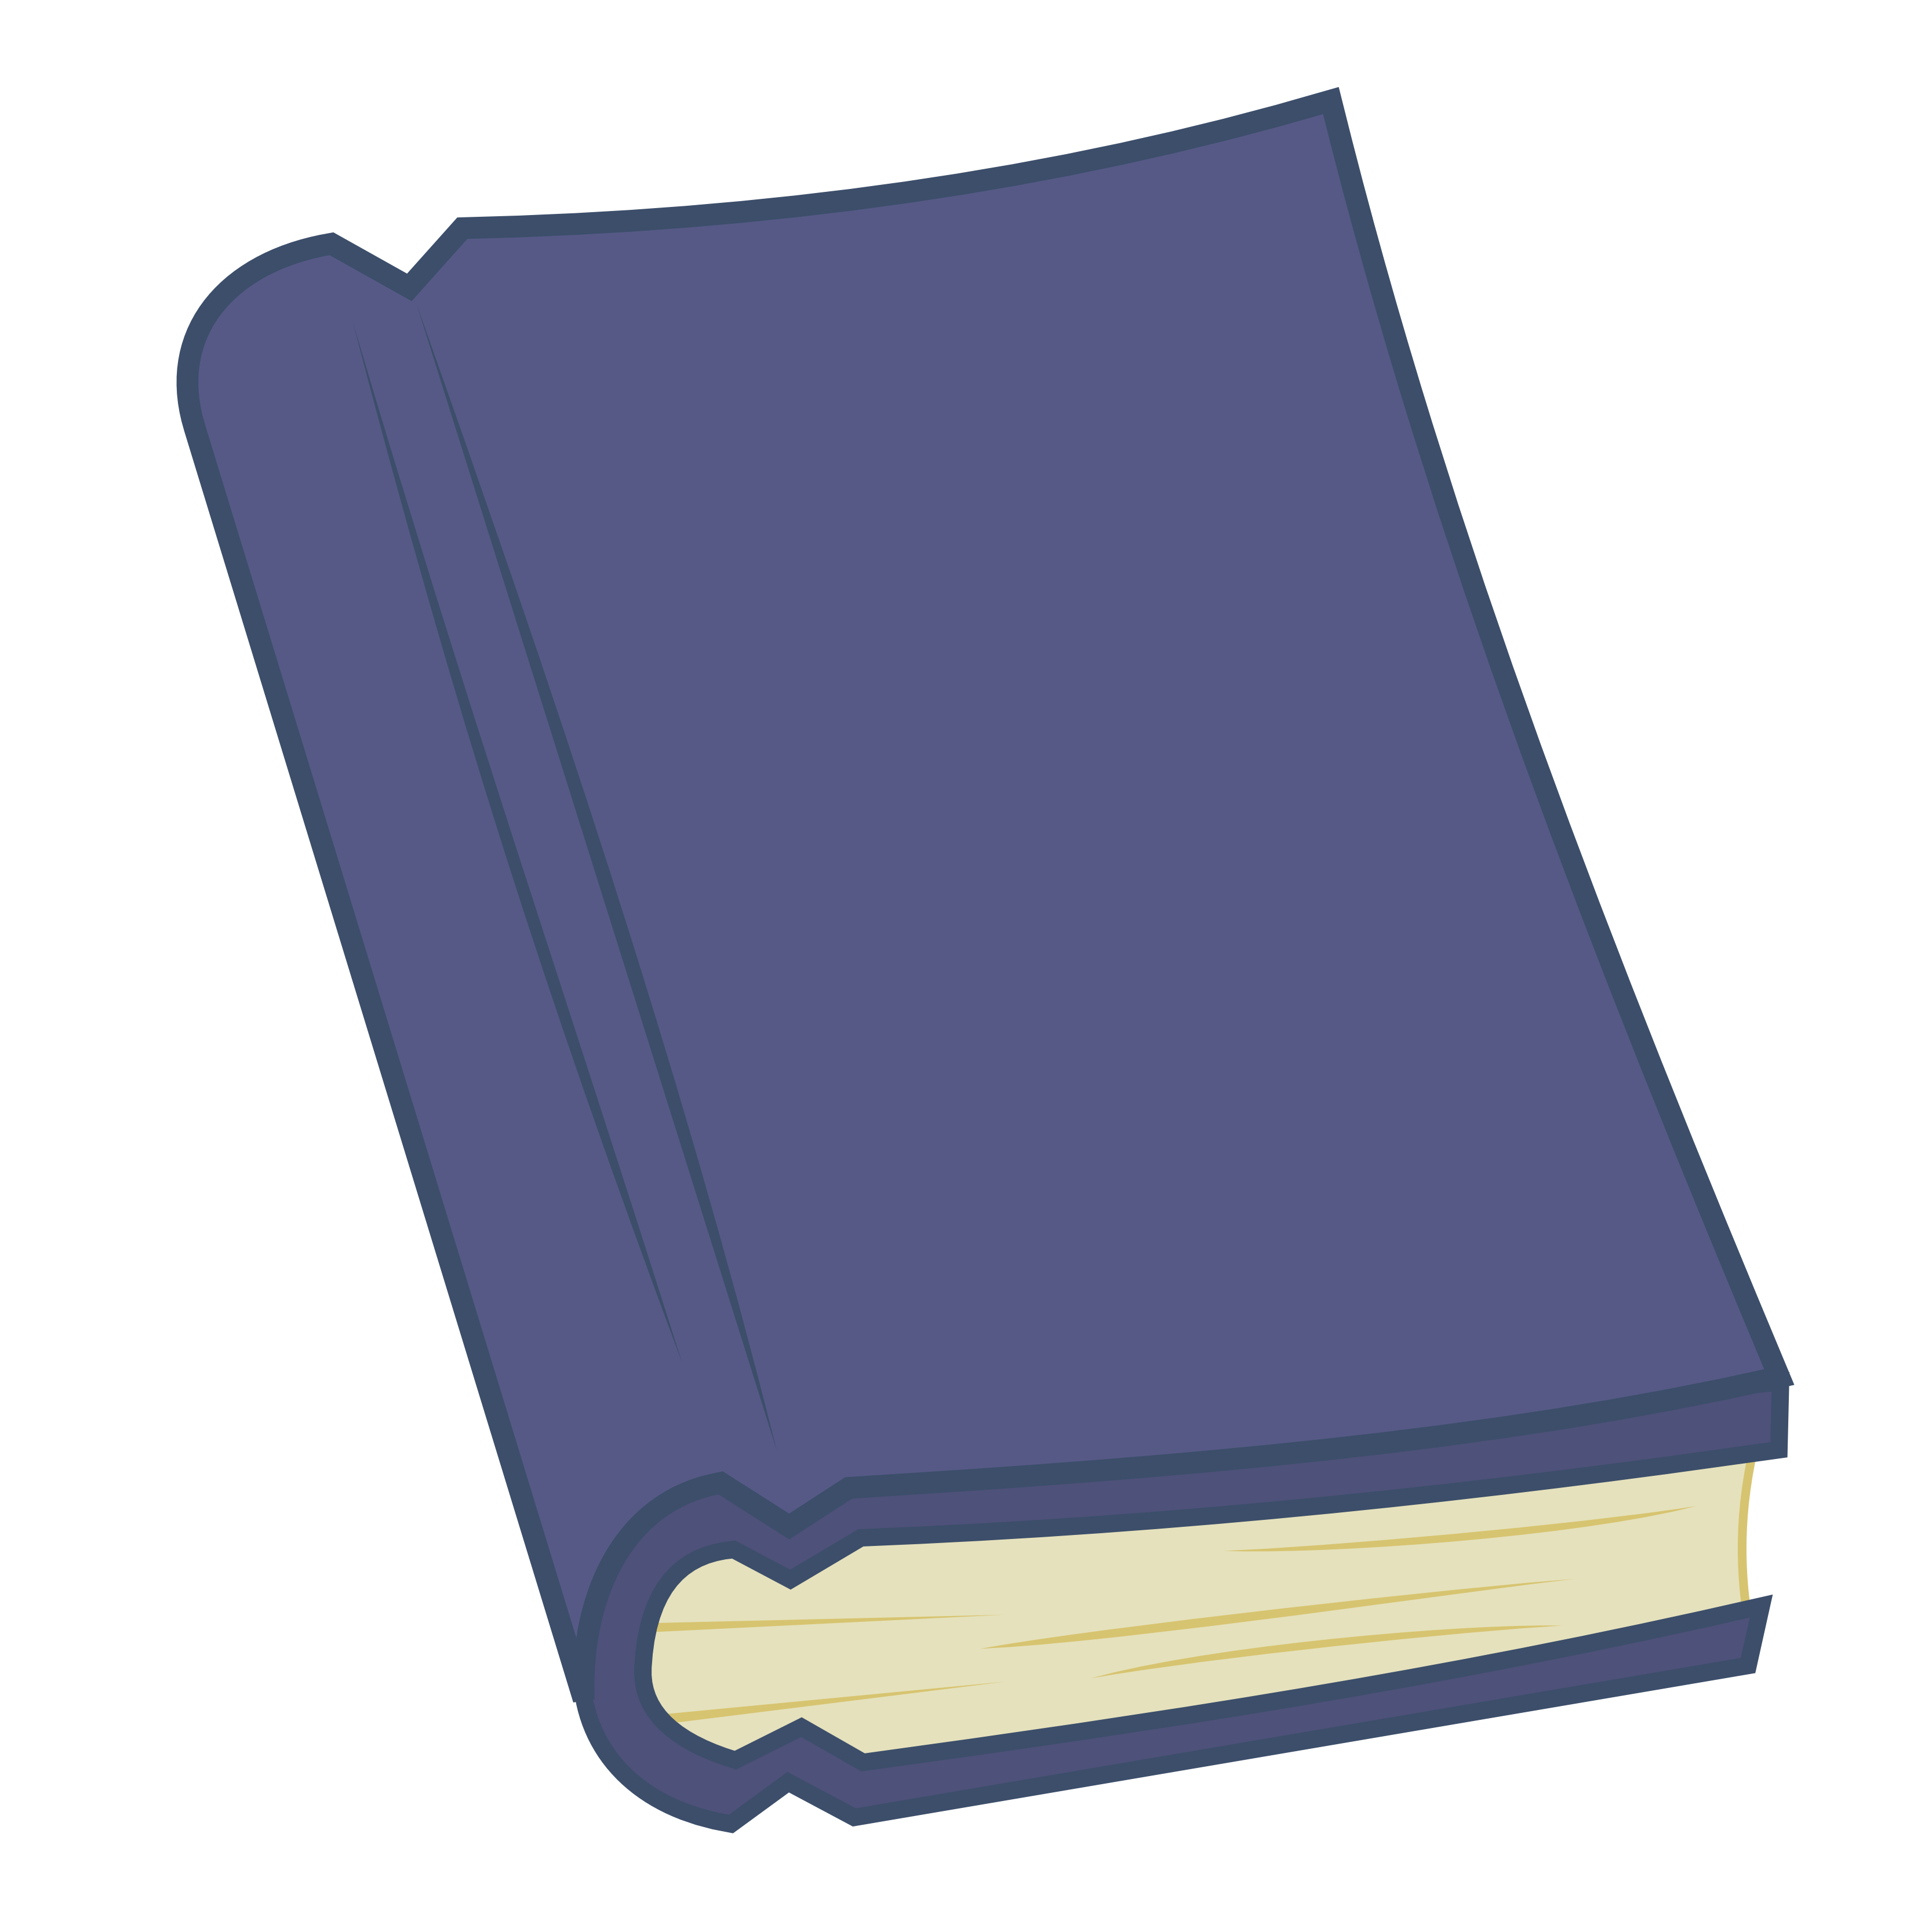 Closed Book Vector | Clipart Panda - Free Clipart Images